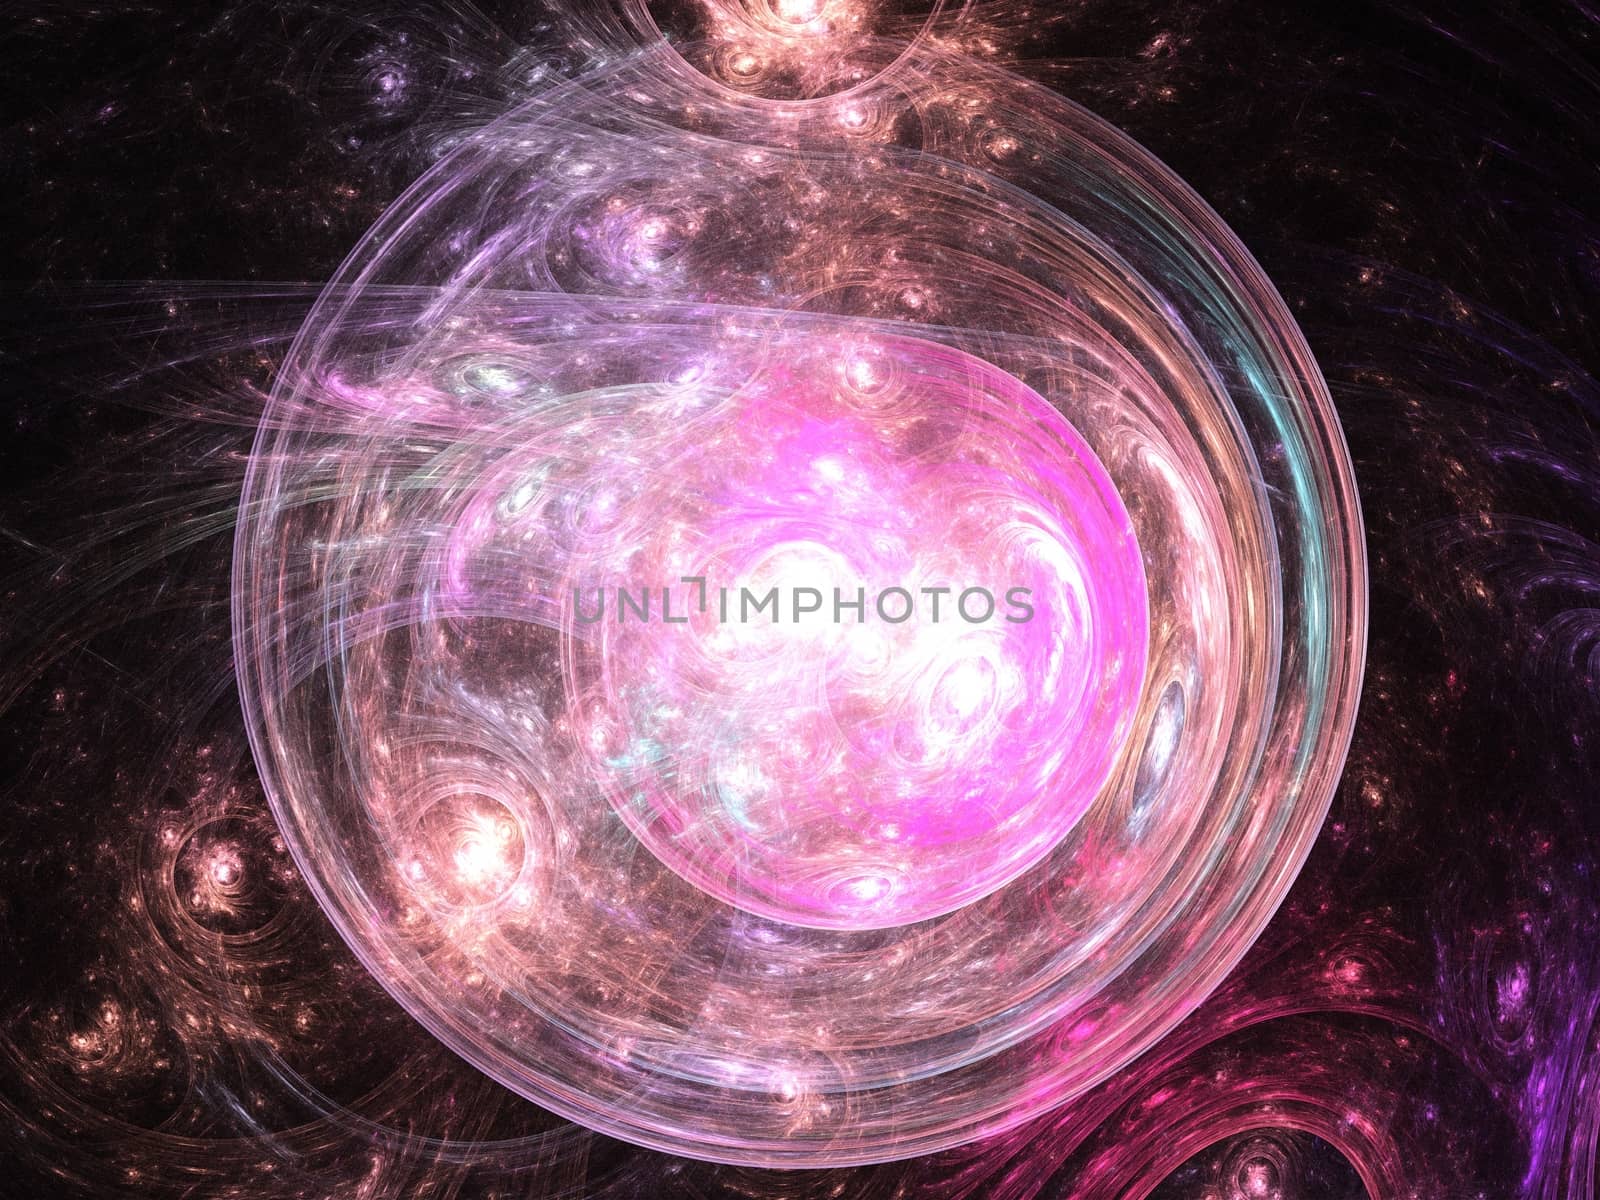 Colorful Fractal Plasma Sphere, Strings of Chaotic Plasma Energy. 
Smoke, Energy Ball Discharge, Scientific Plasma Study. Digital Flames, 
Artistic Design, Science Fiction, Abstract Illustration by Sem007